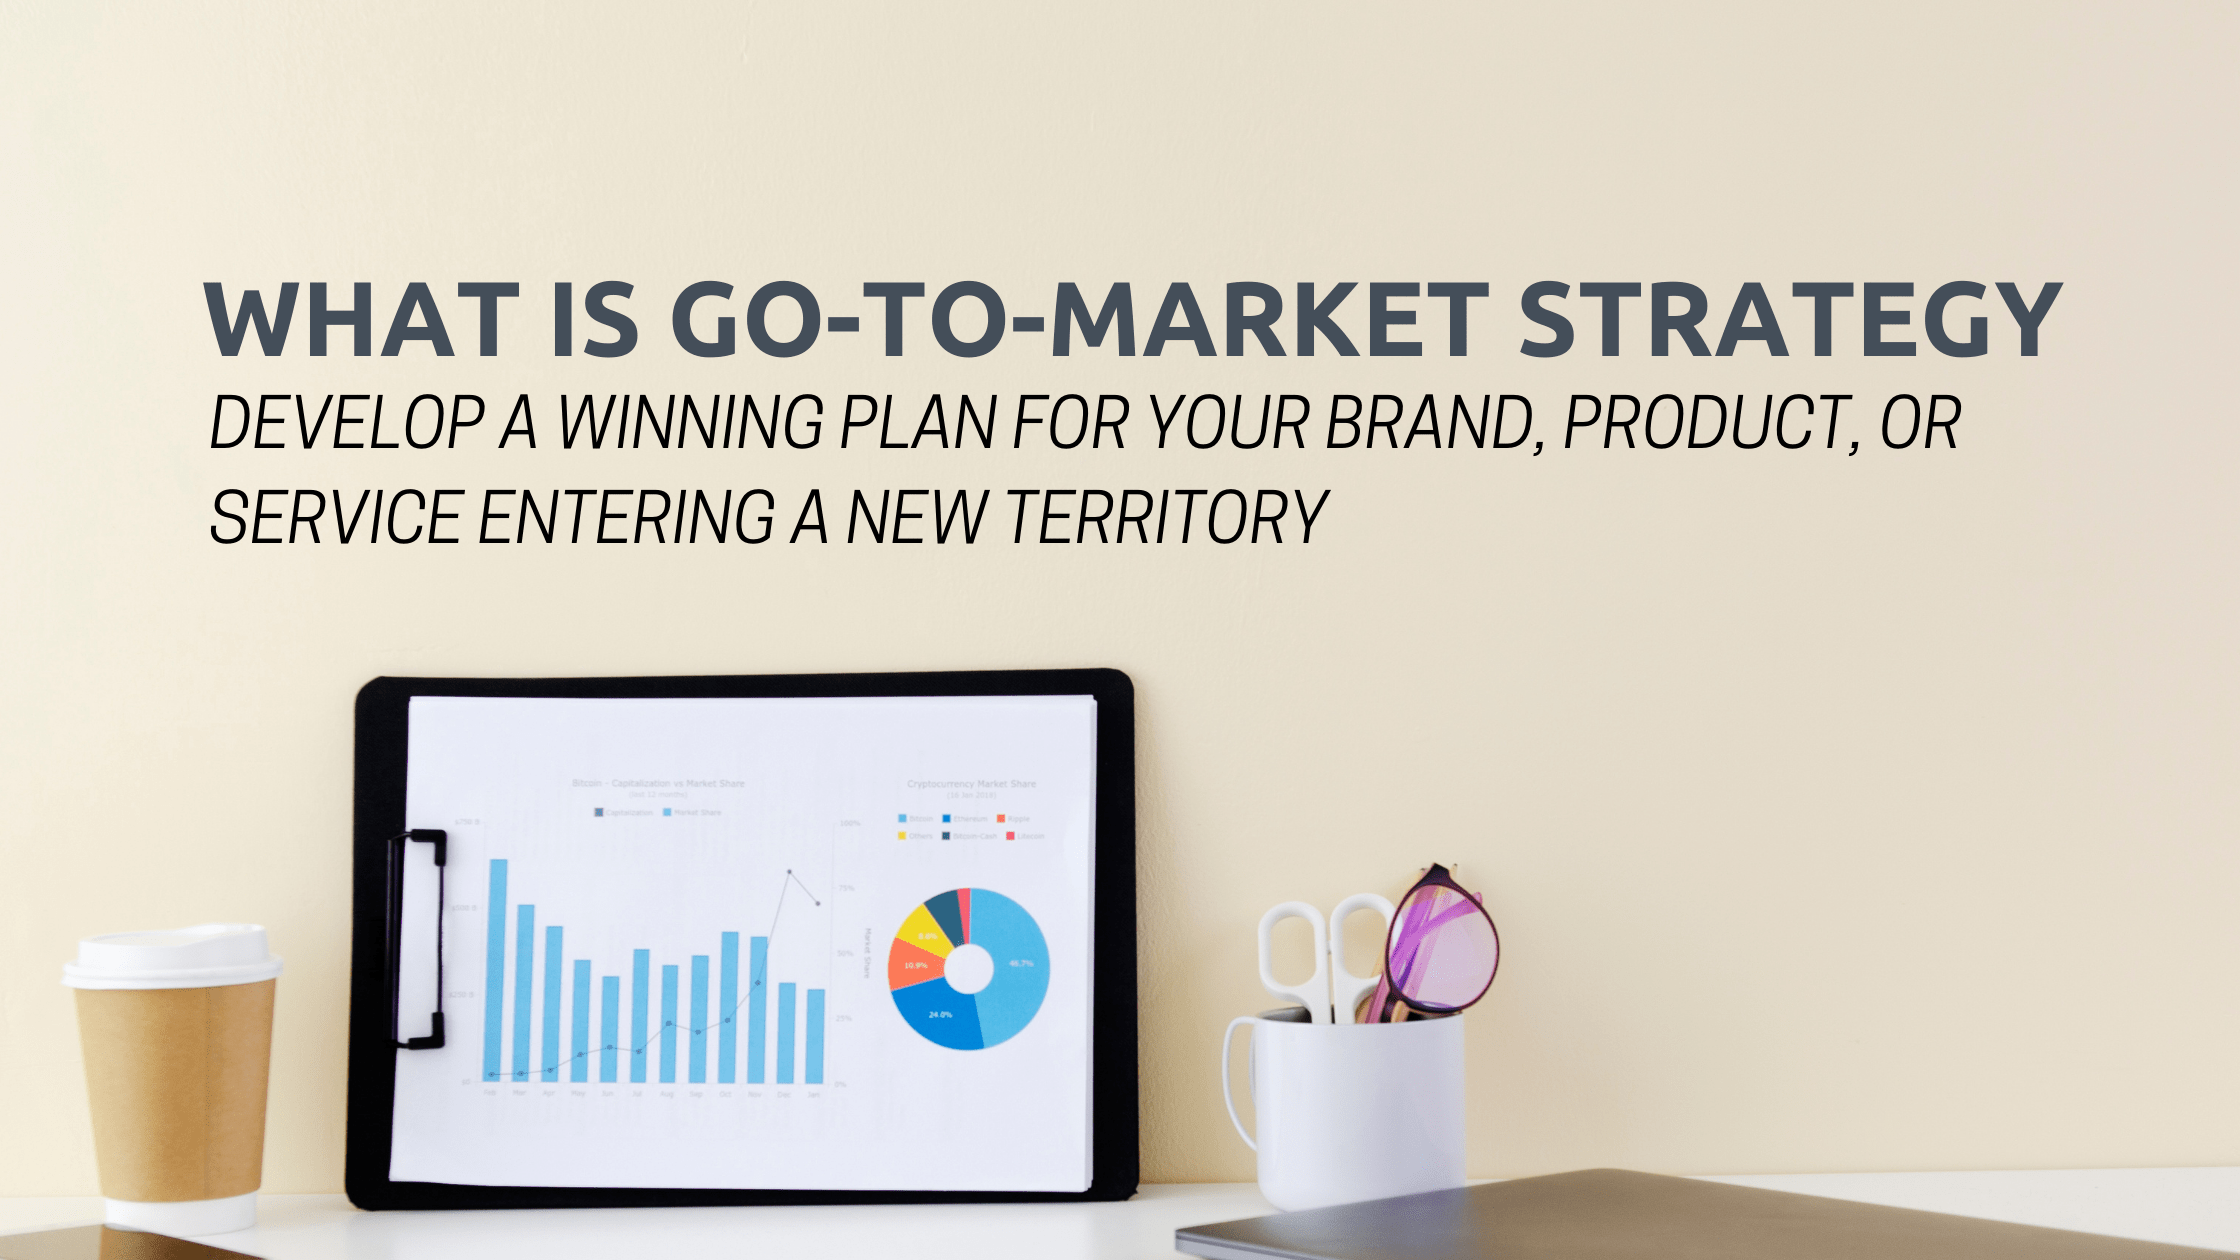 In running a business, most importantly when releasing a new product, the last thing you want is to launch it without a proper go-to-market (GTM) strategy.